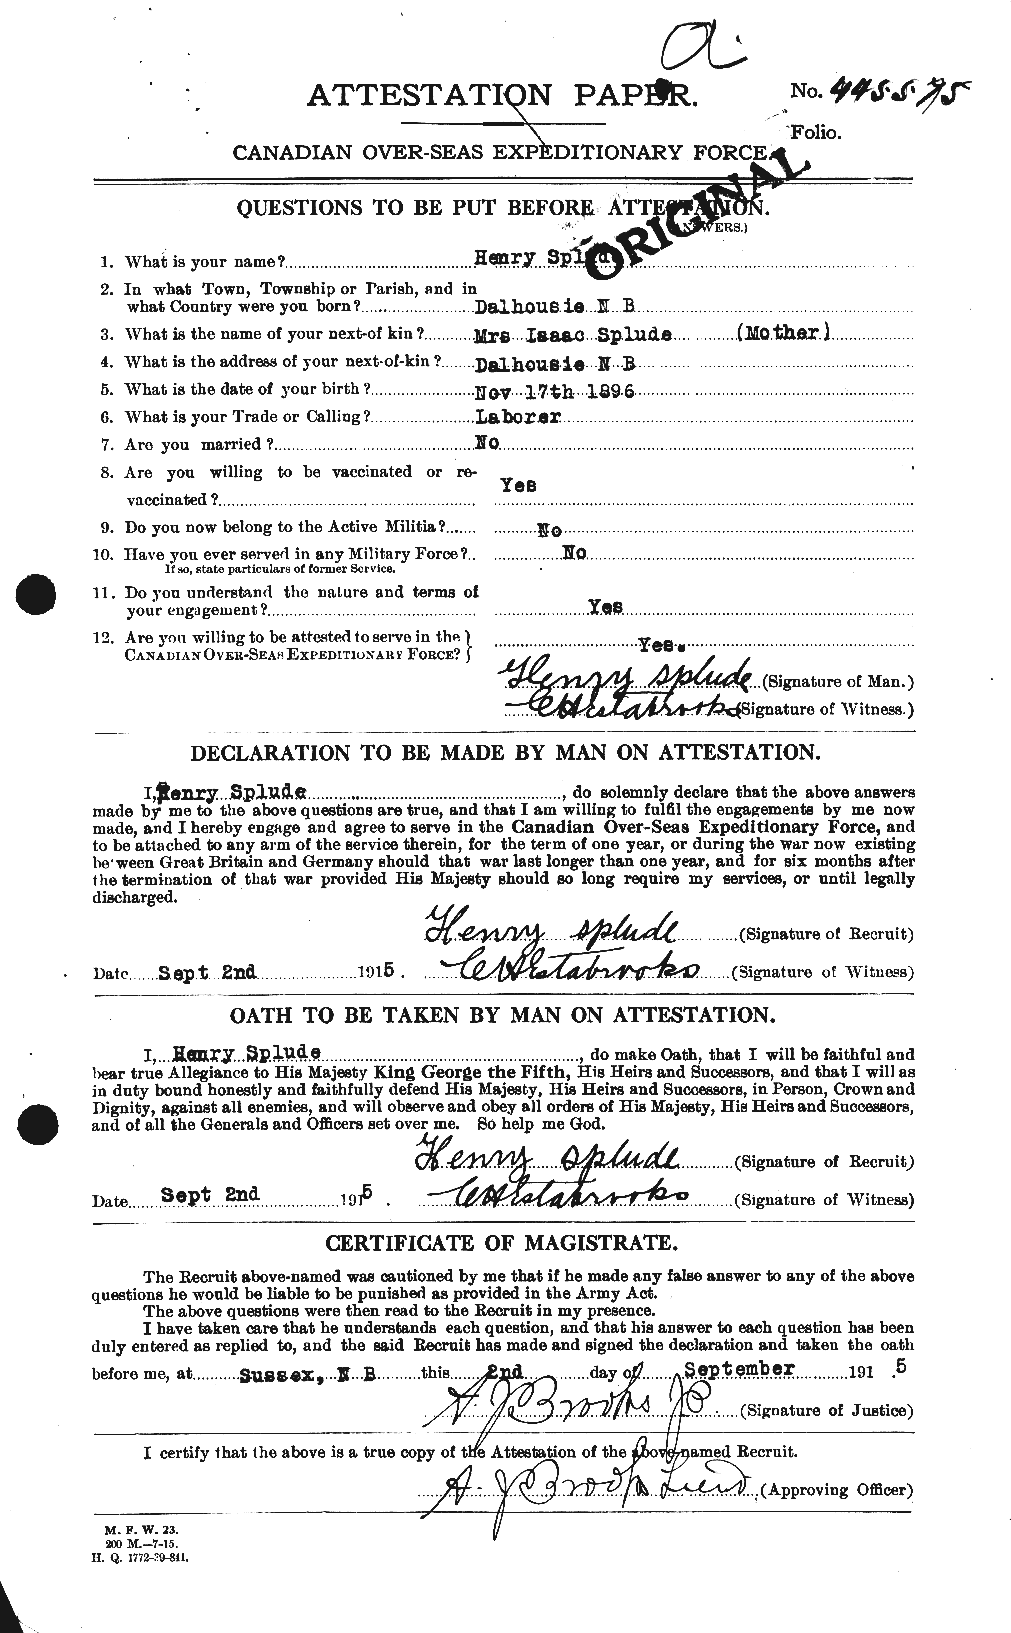 Personnel Records of the First World War - CEF 113684a